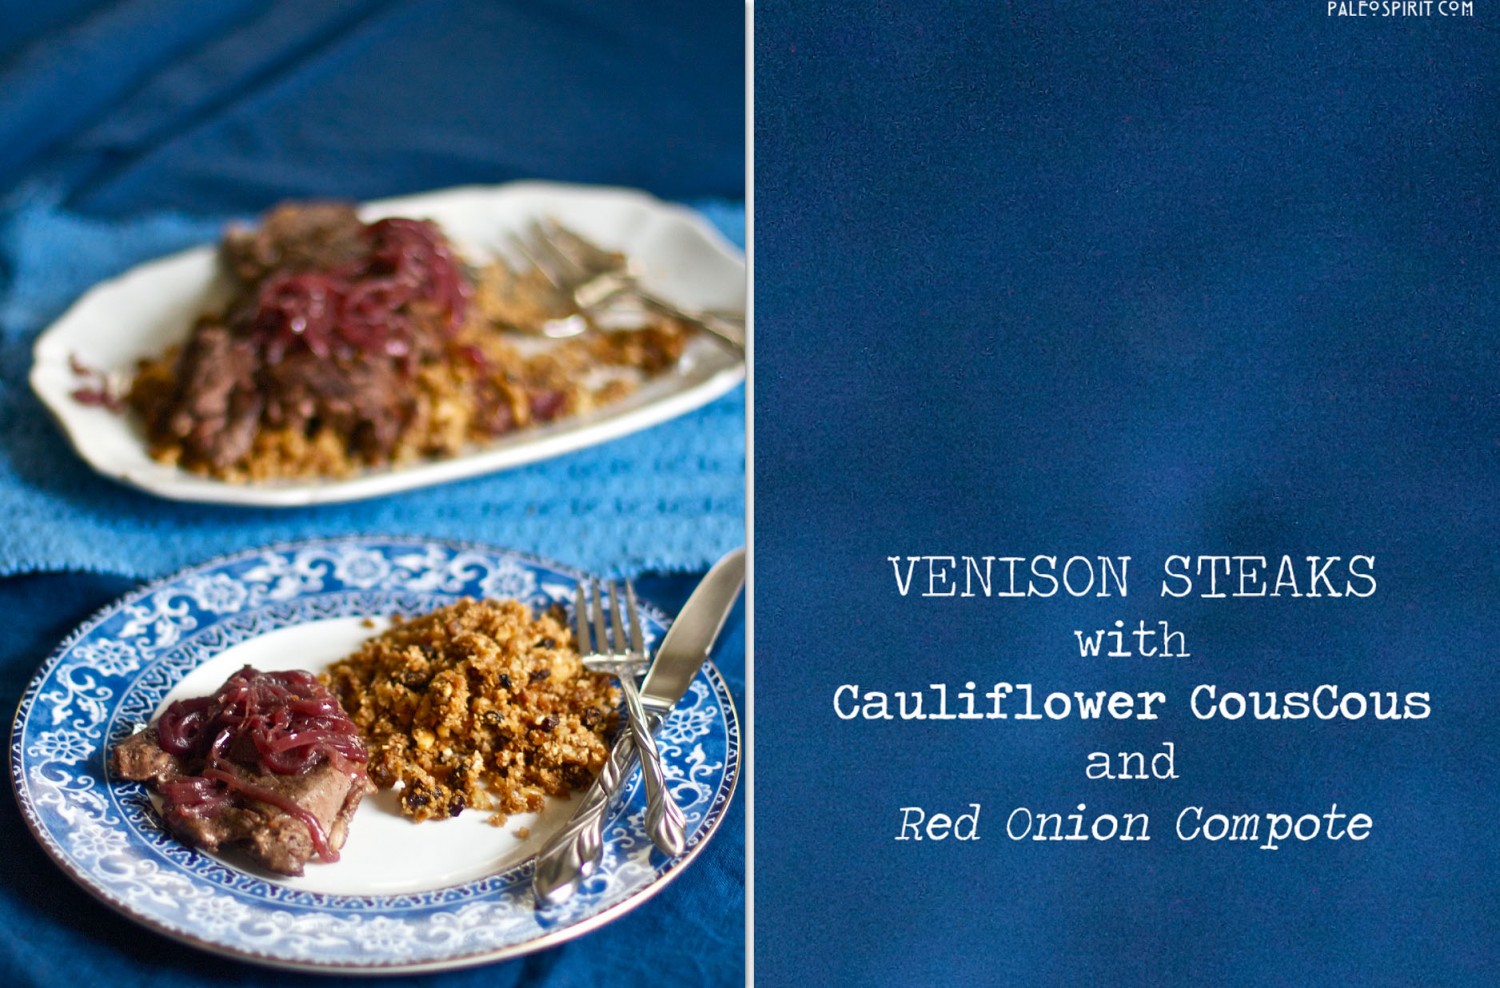 Venison Steak with Cauliflower Couscous and Red Onion Compote (Paleo)